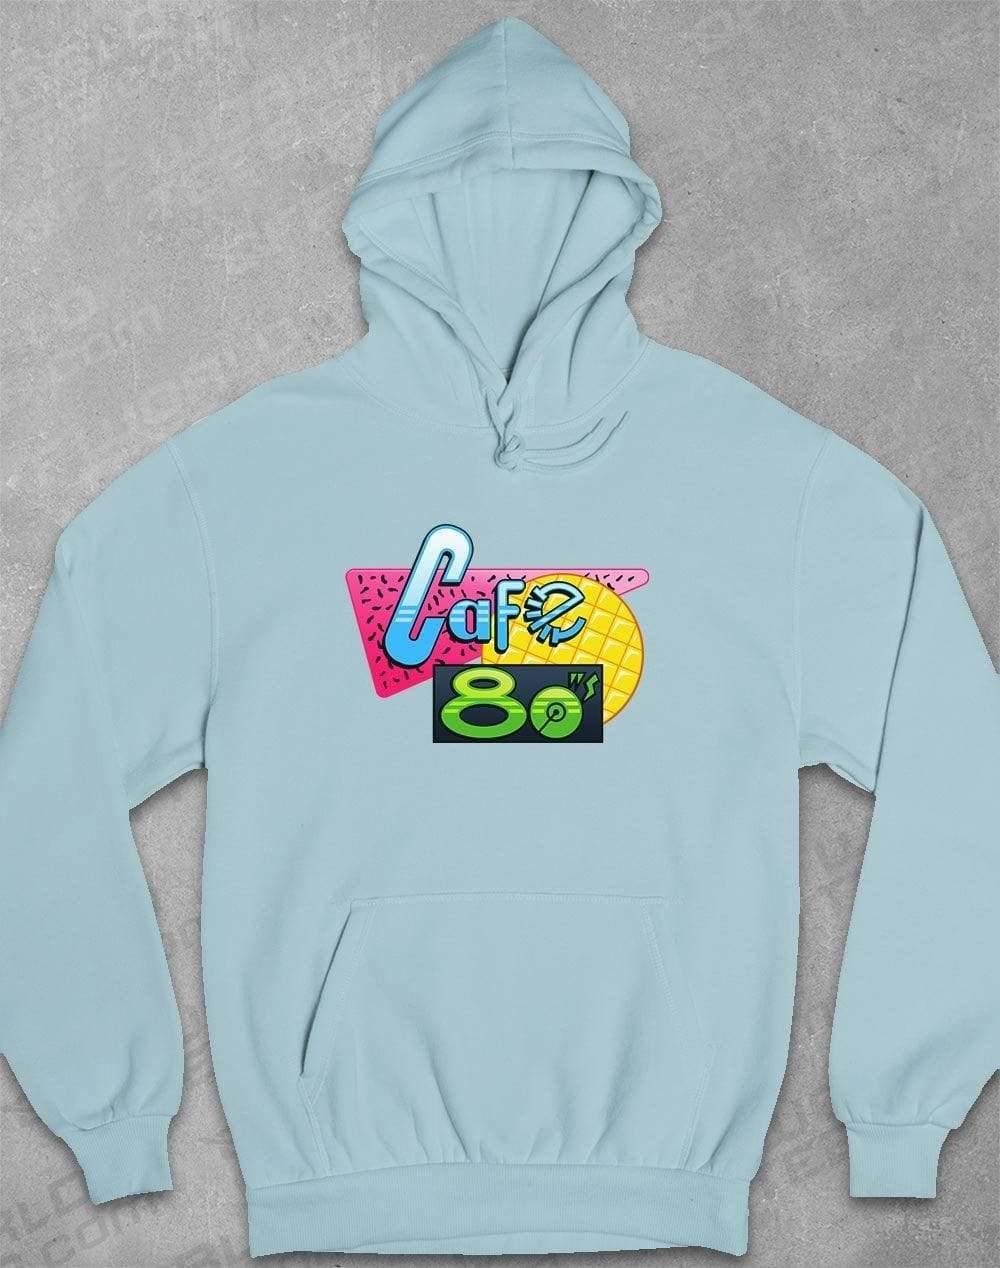 Cafe 80's Hoodie XS / Sky Blue  - Off World Tees